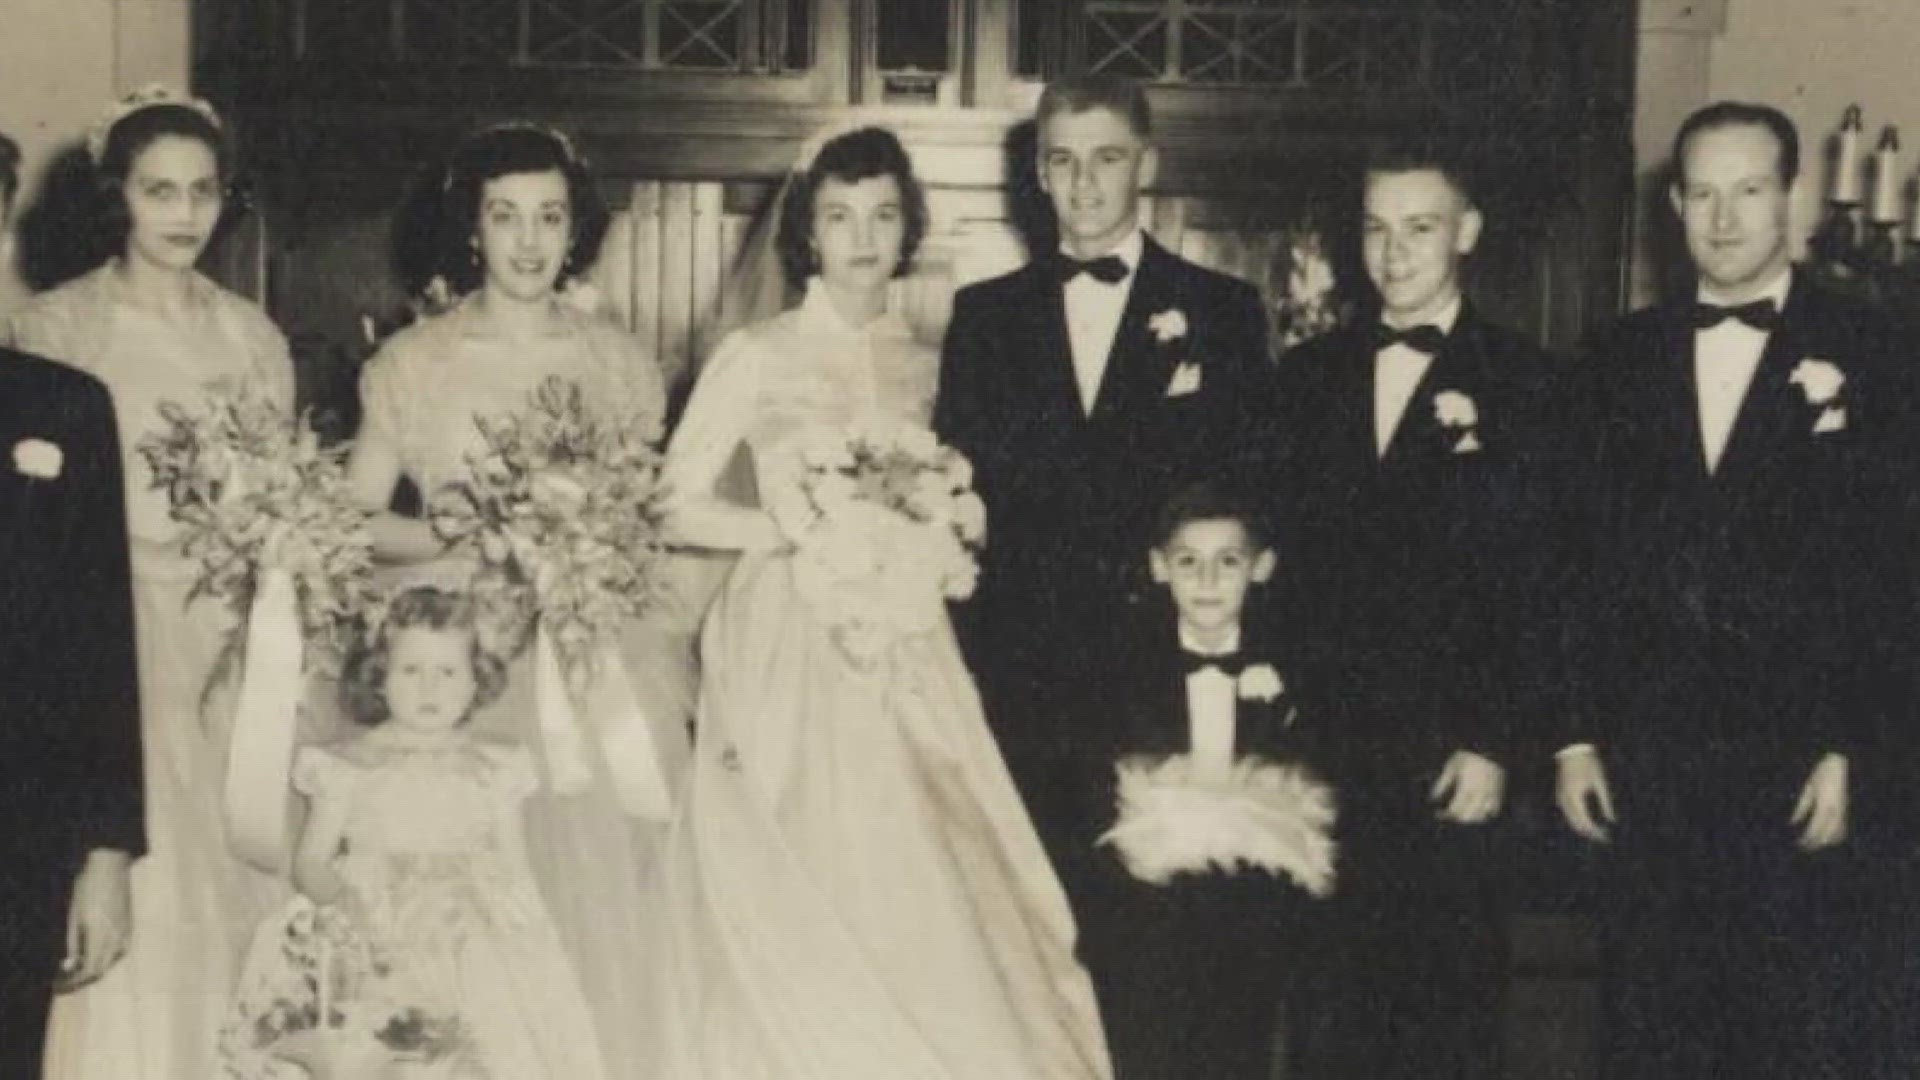 Whitey and Mary Lou Herzog were married in their hometown of New Athens and remained together for more than 70 years before he passed away Tuesday at 92.